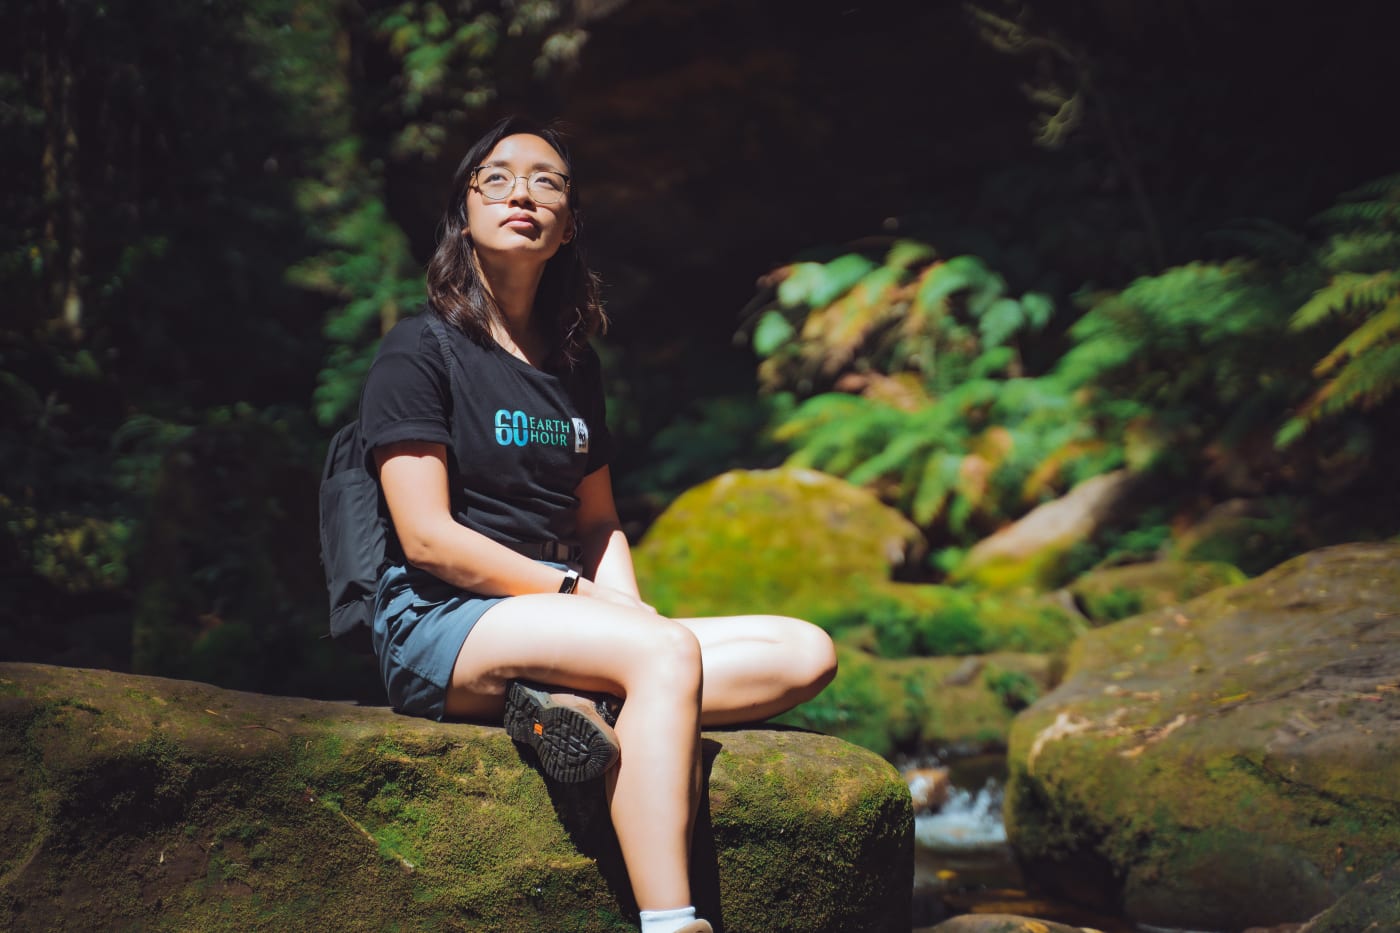 Leonie Sii takes time out for nature in the Blue Mountains for Earth Hour